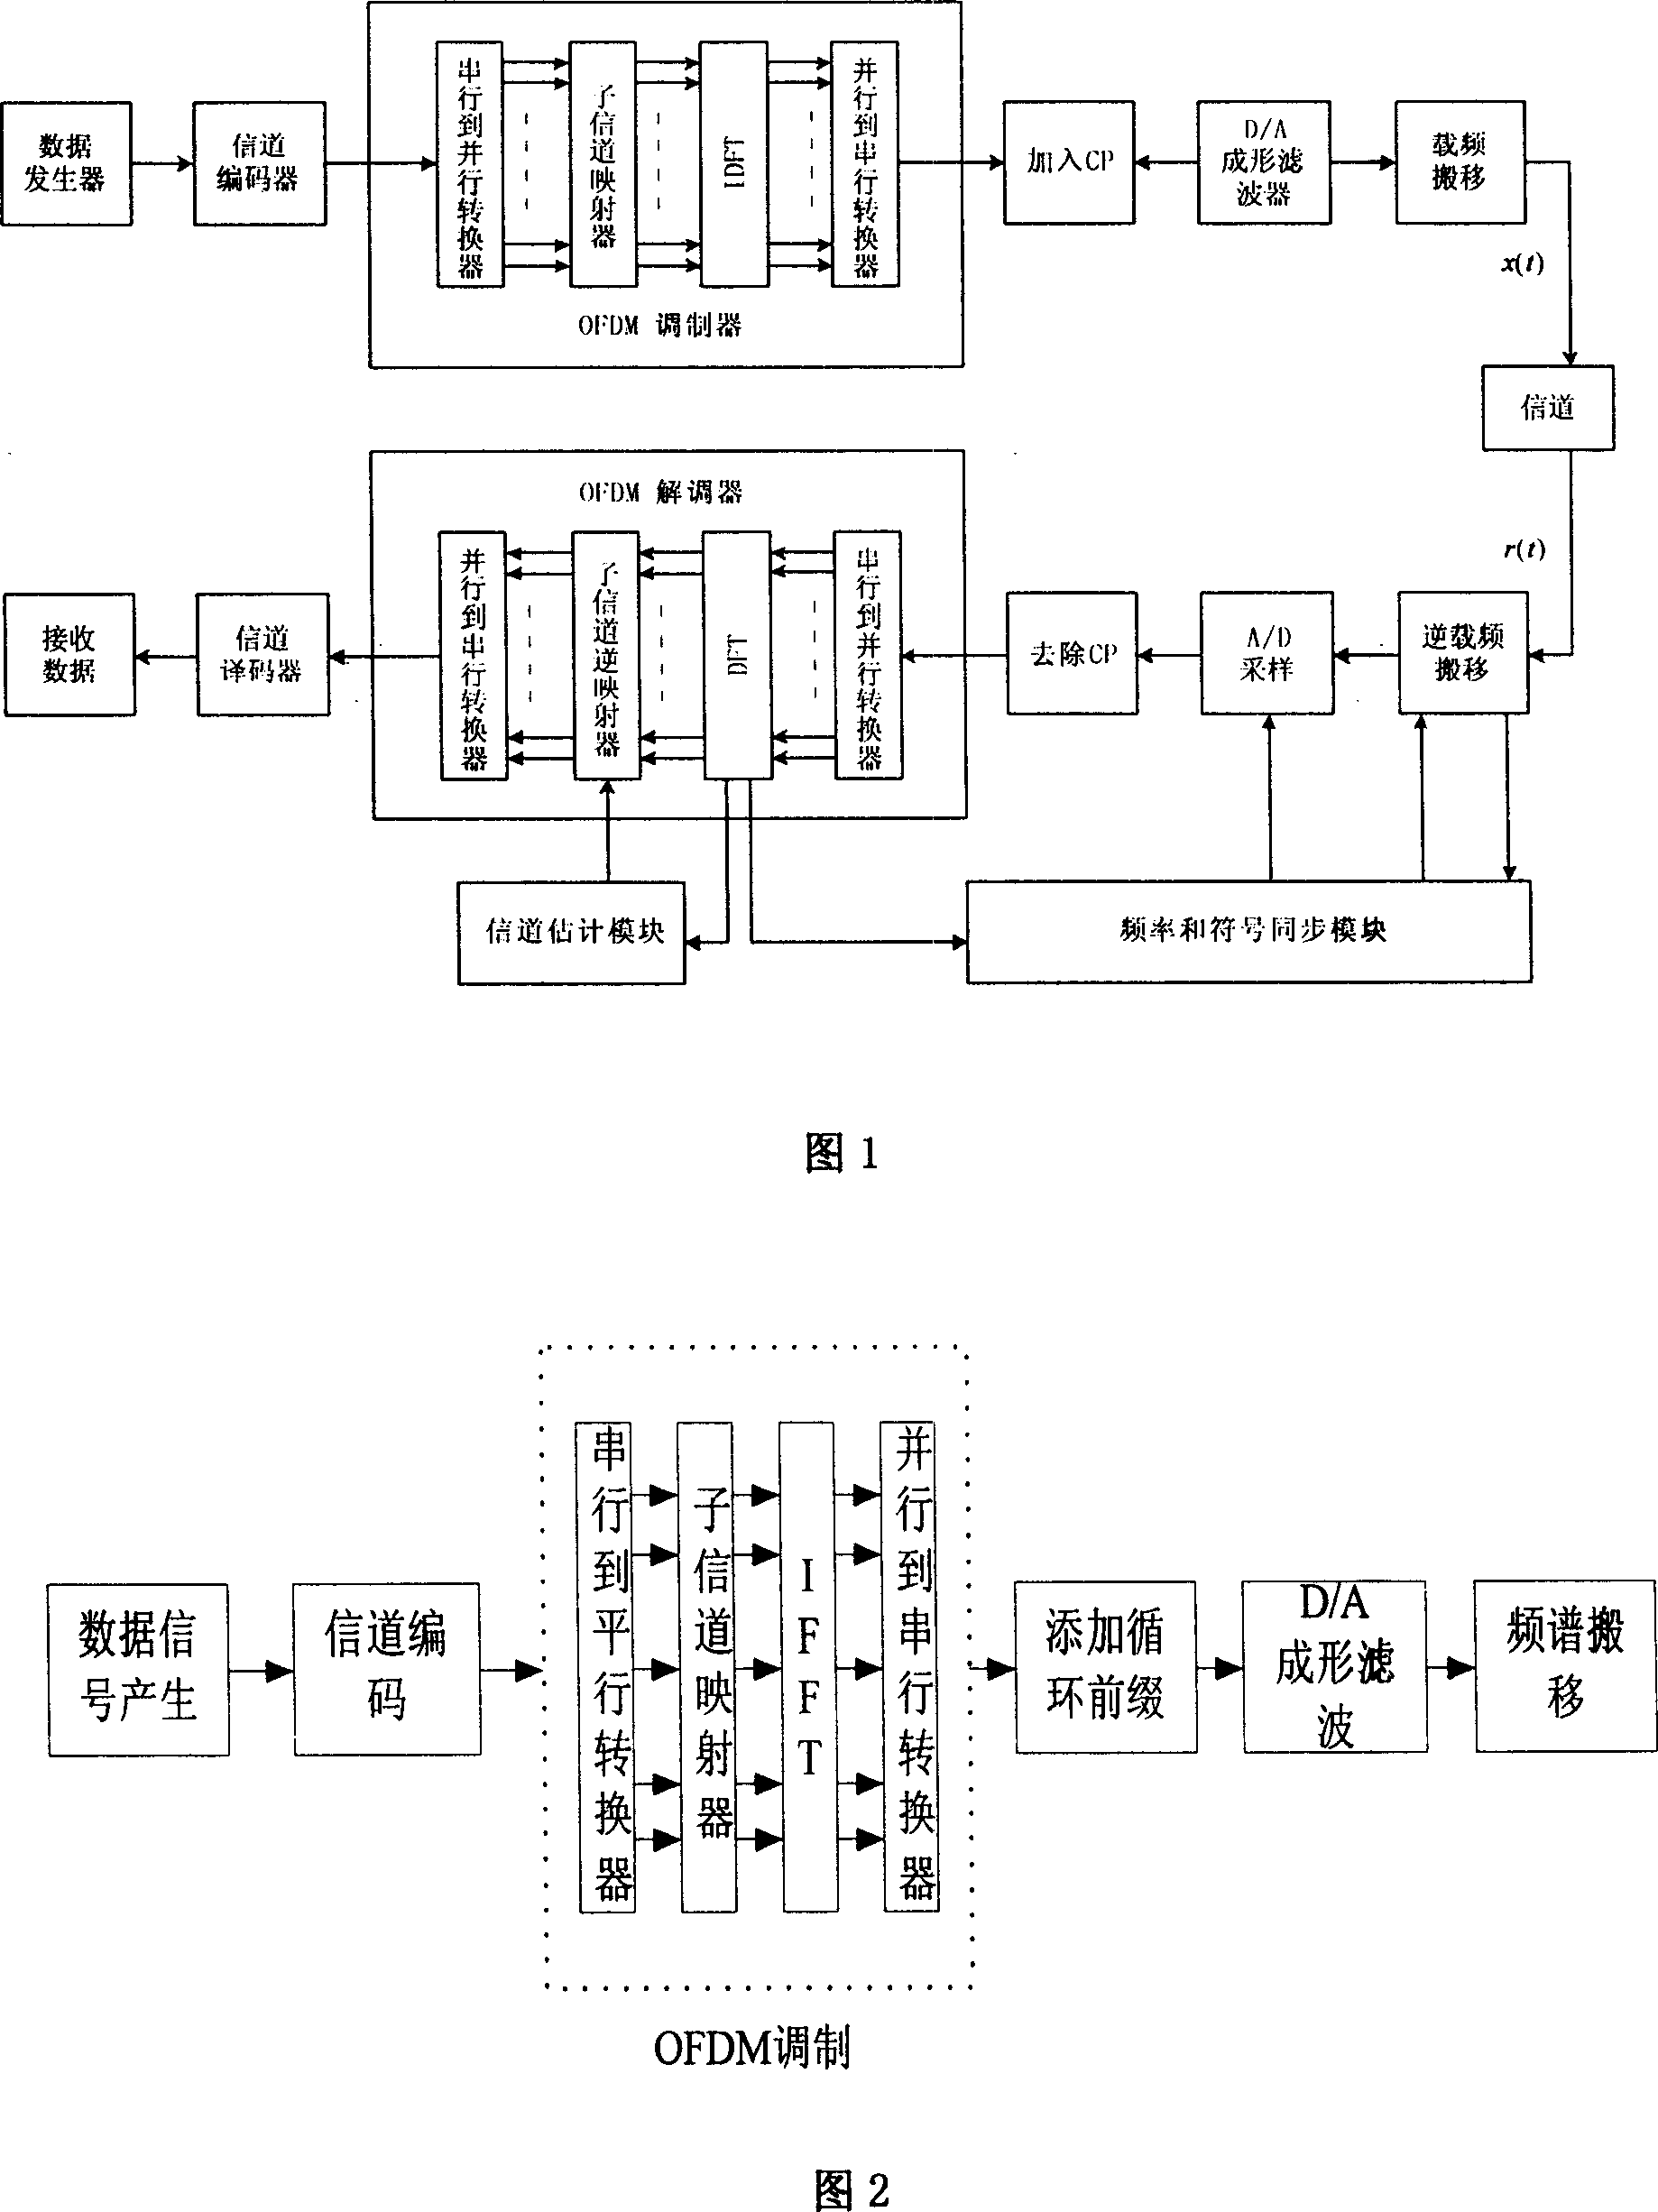 Method for realizing power line carrier communication system